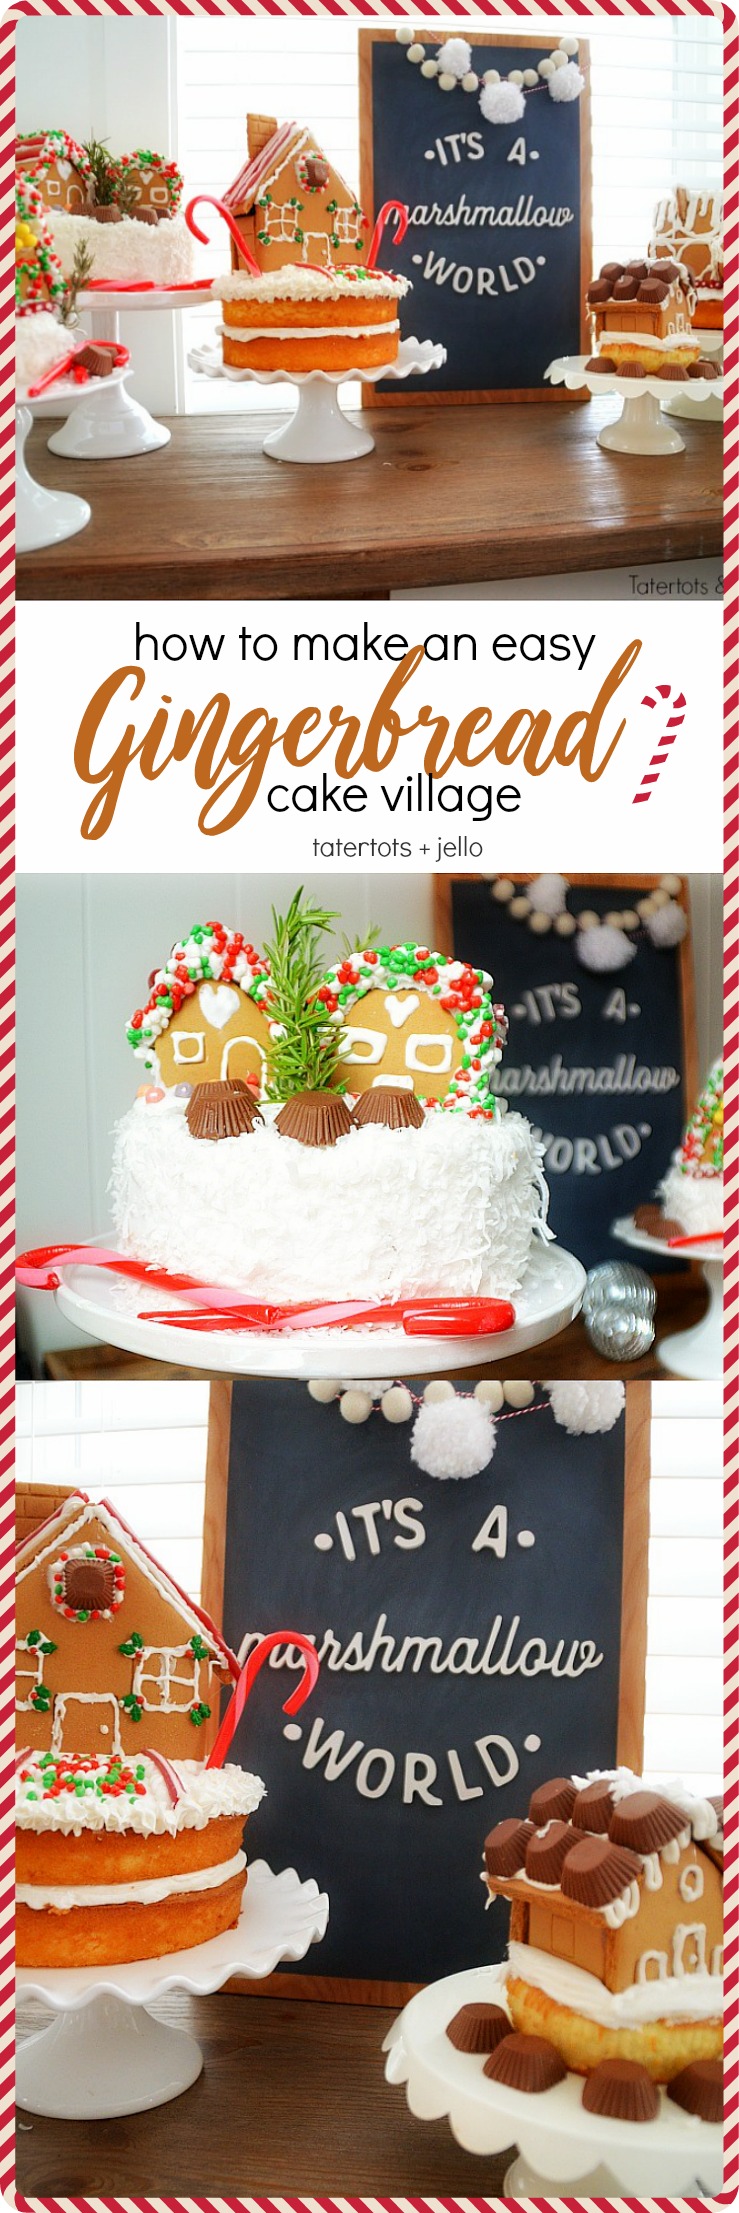 how to make an easy gingerbread cake village - kids love helping! Perfect for holiday parties.